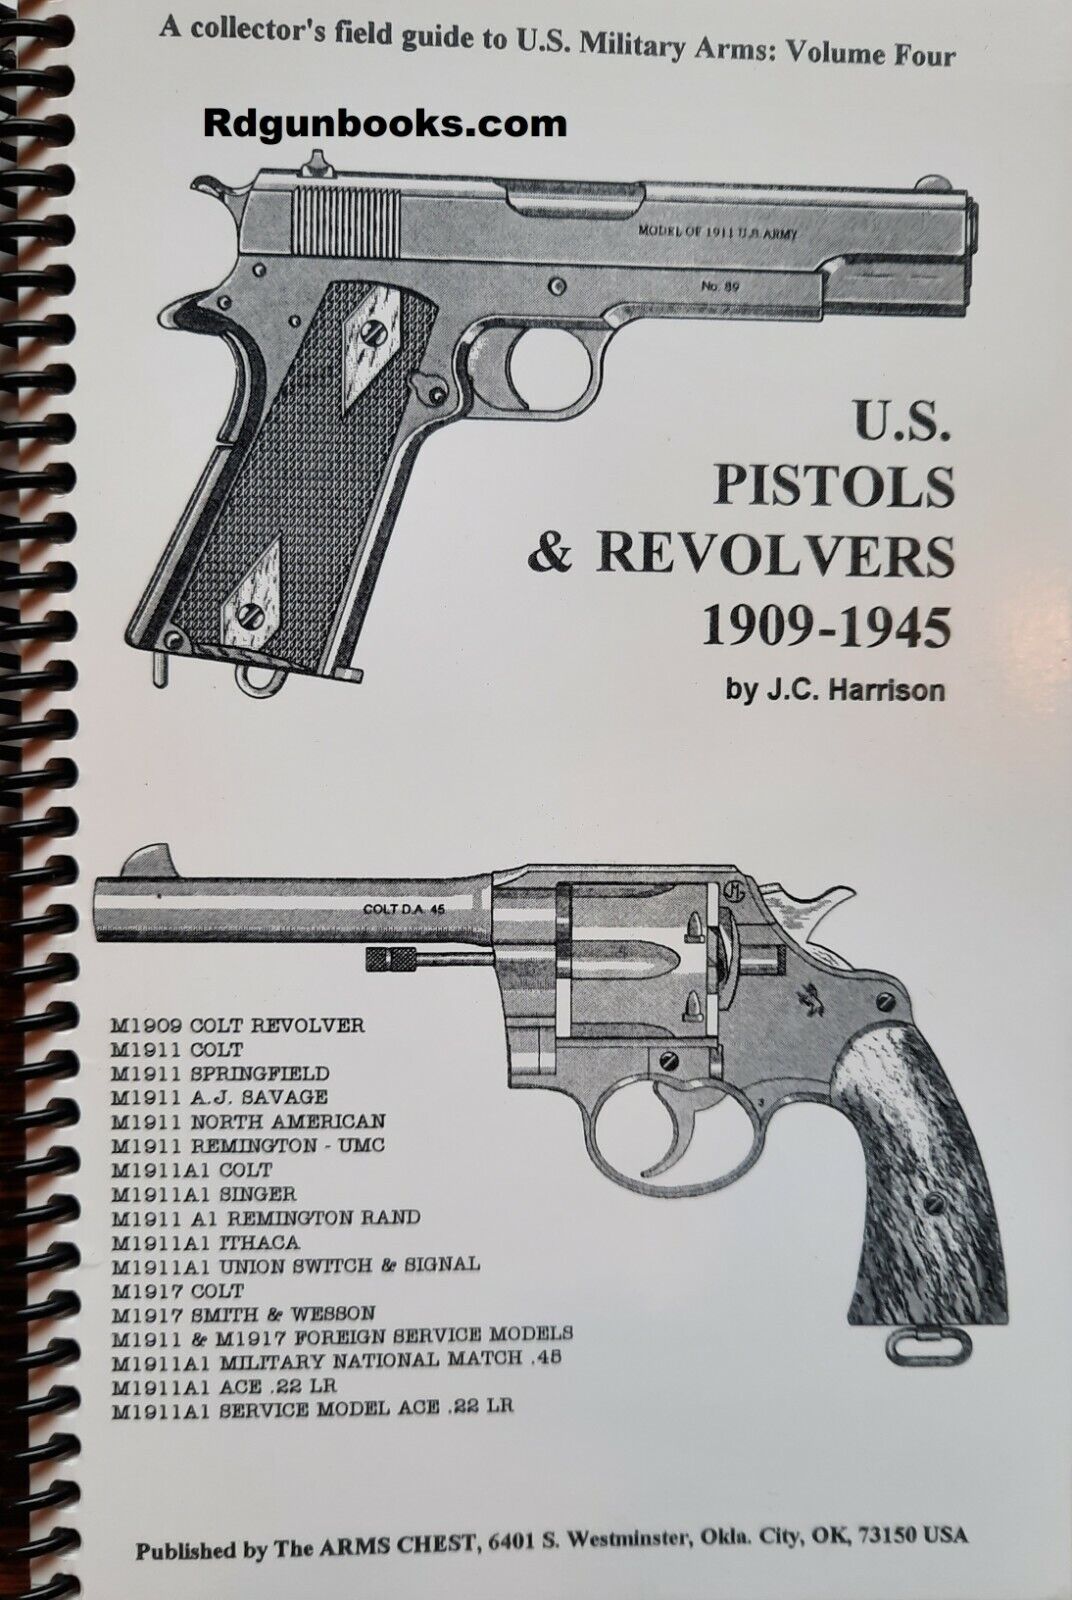 U.S. Pistols & Revolvers 1909 to 1945 by J. Harrison out of print gun book